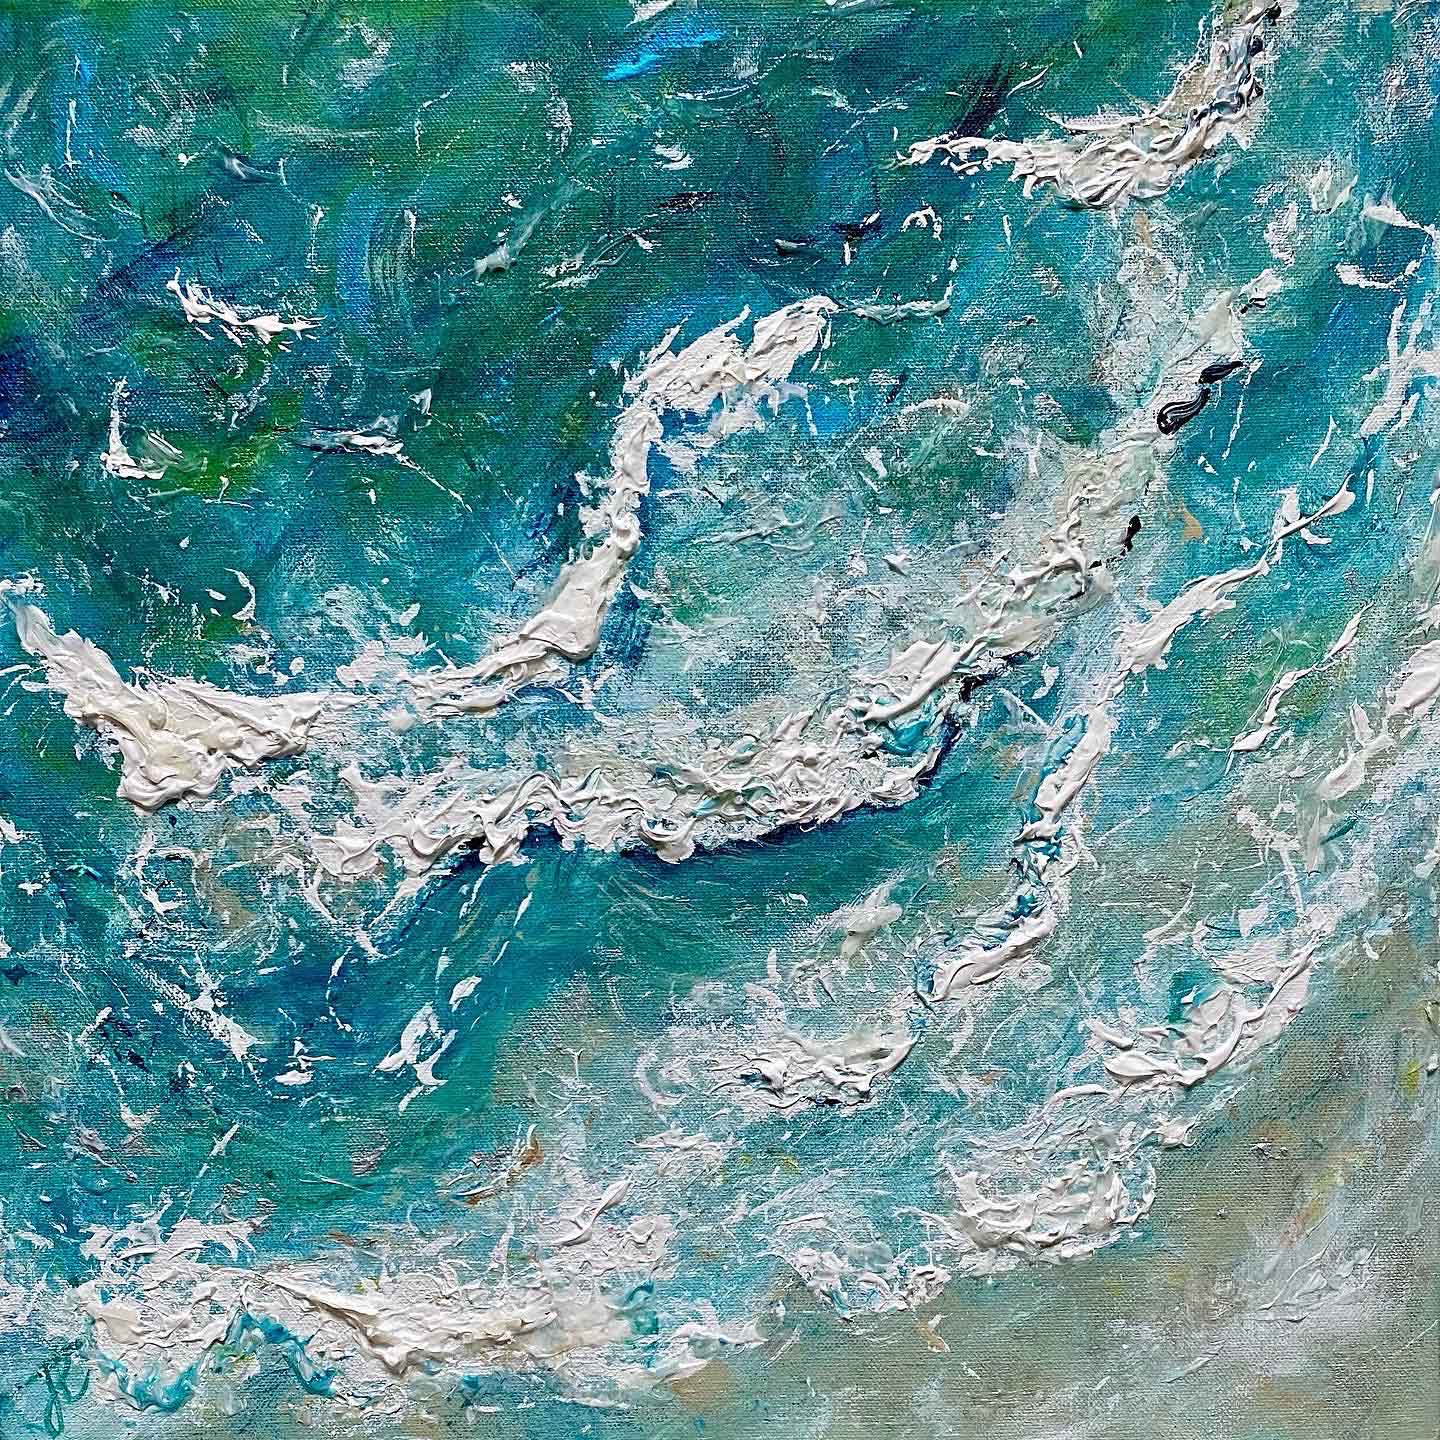 Textured painting of seascape with aerial view of waves on shoreline